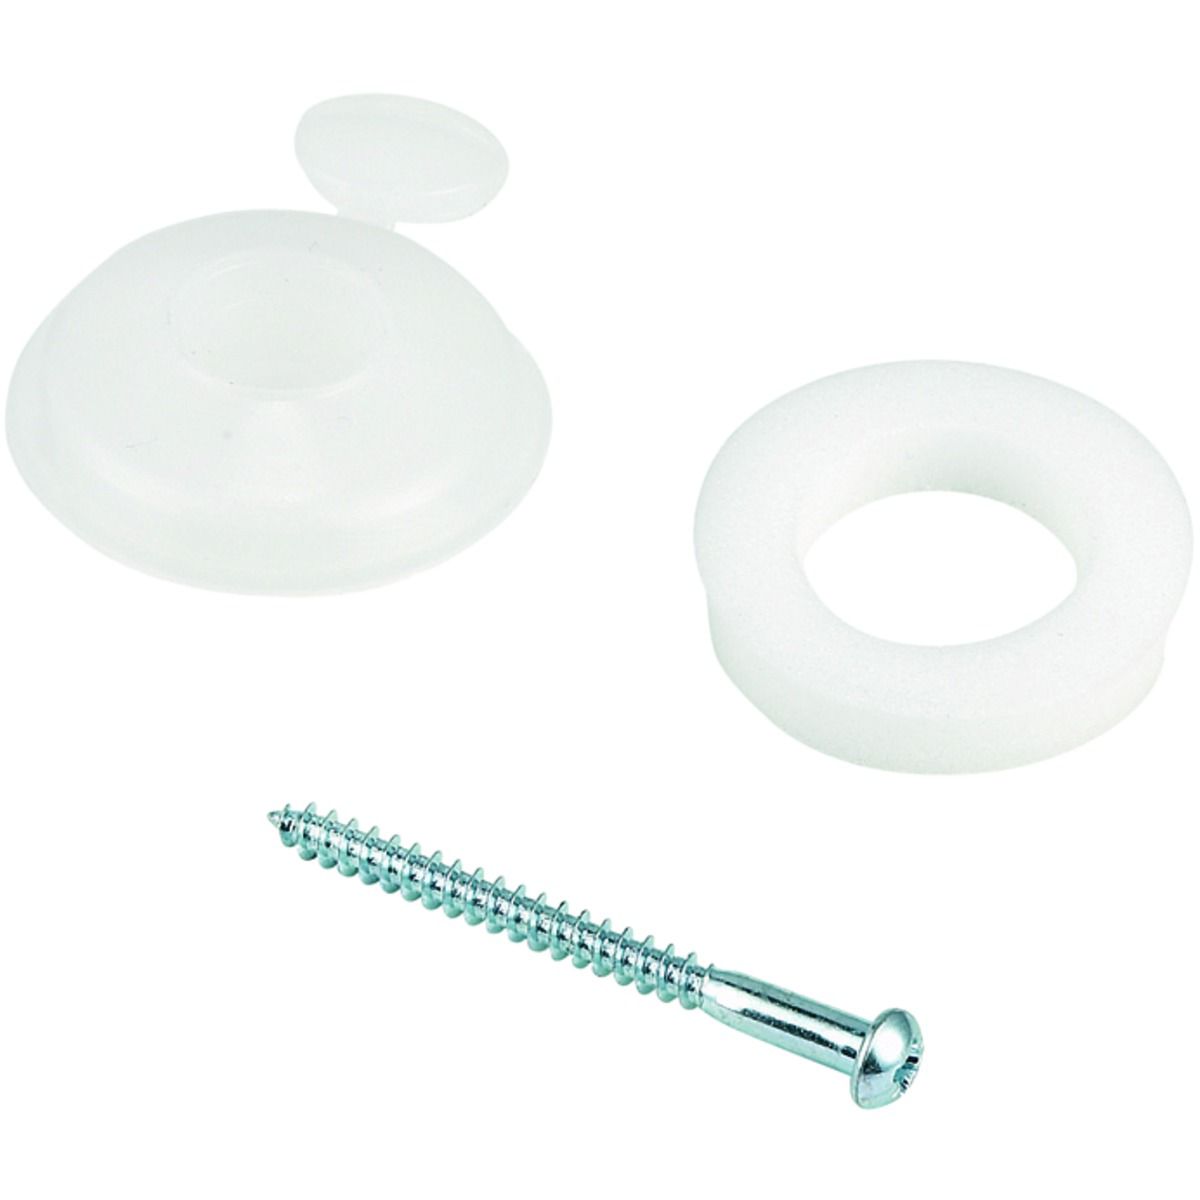 Image of Wickes Clear Polycarbonate Fixing Buttons for 16mm Polycarbonate Sheets - Pack of 10